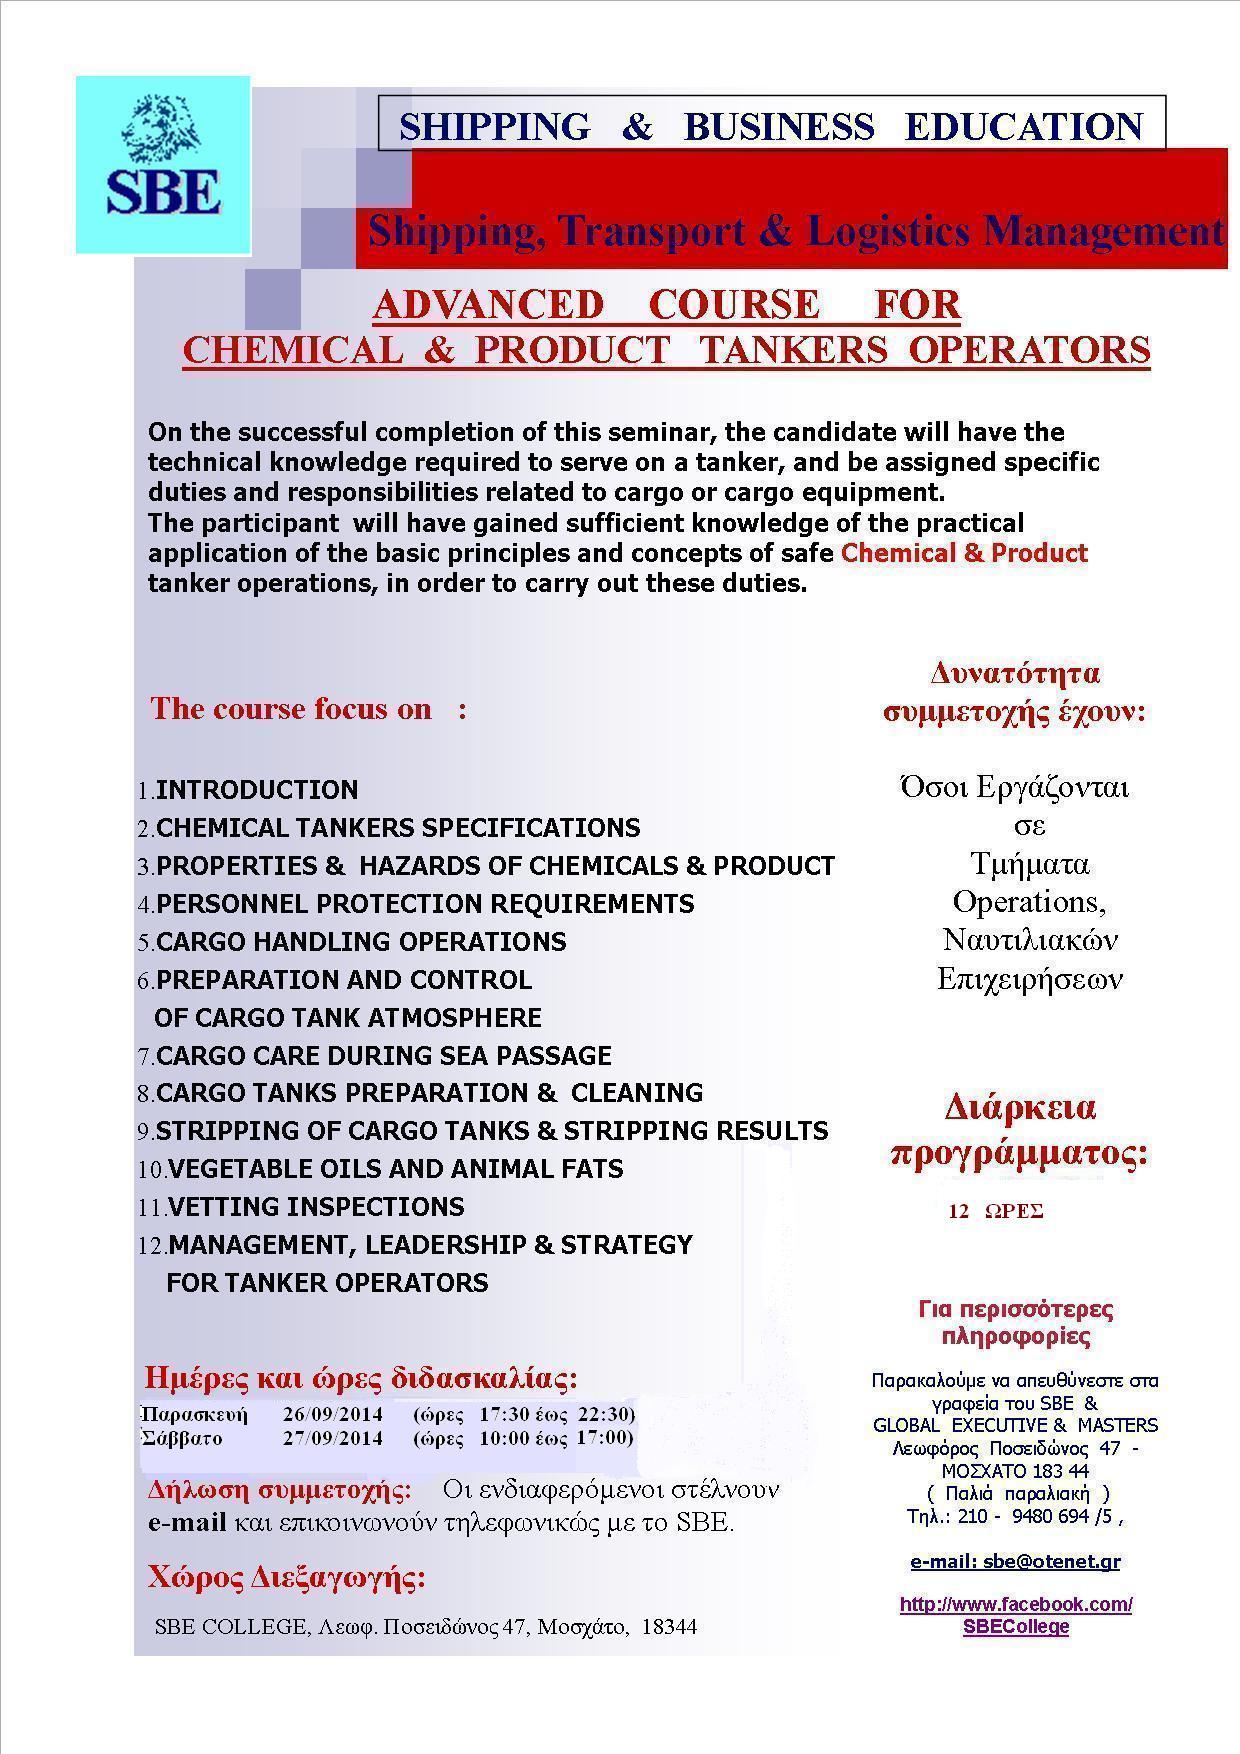 SBE – Advanced course for Chemical & Product Tankers Operators